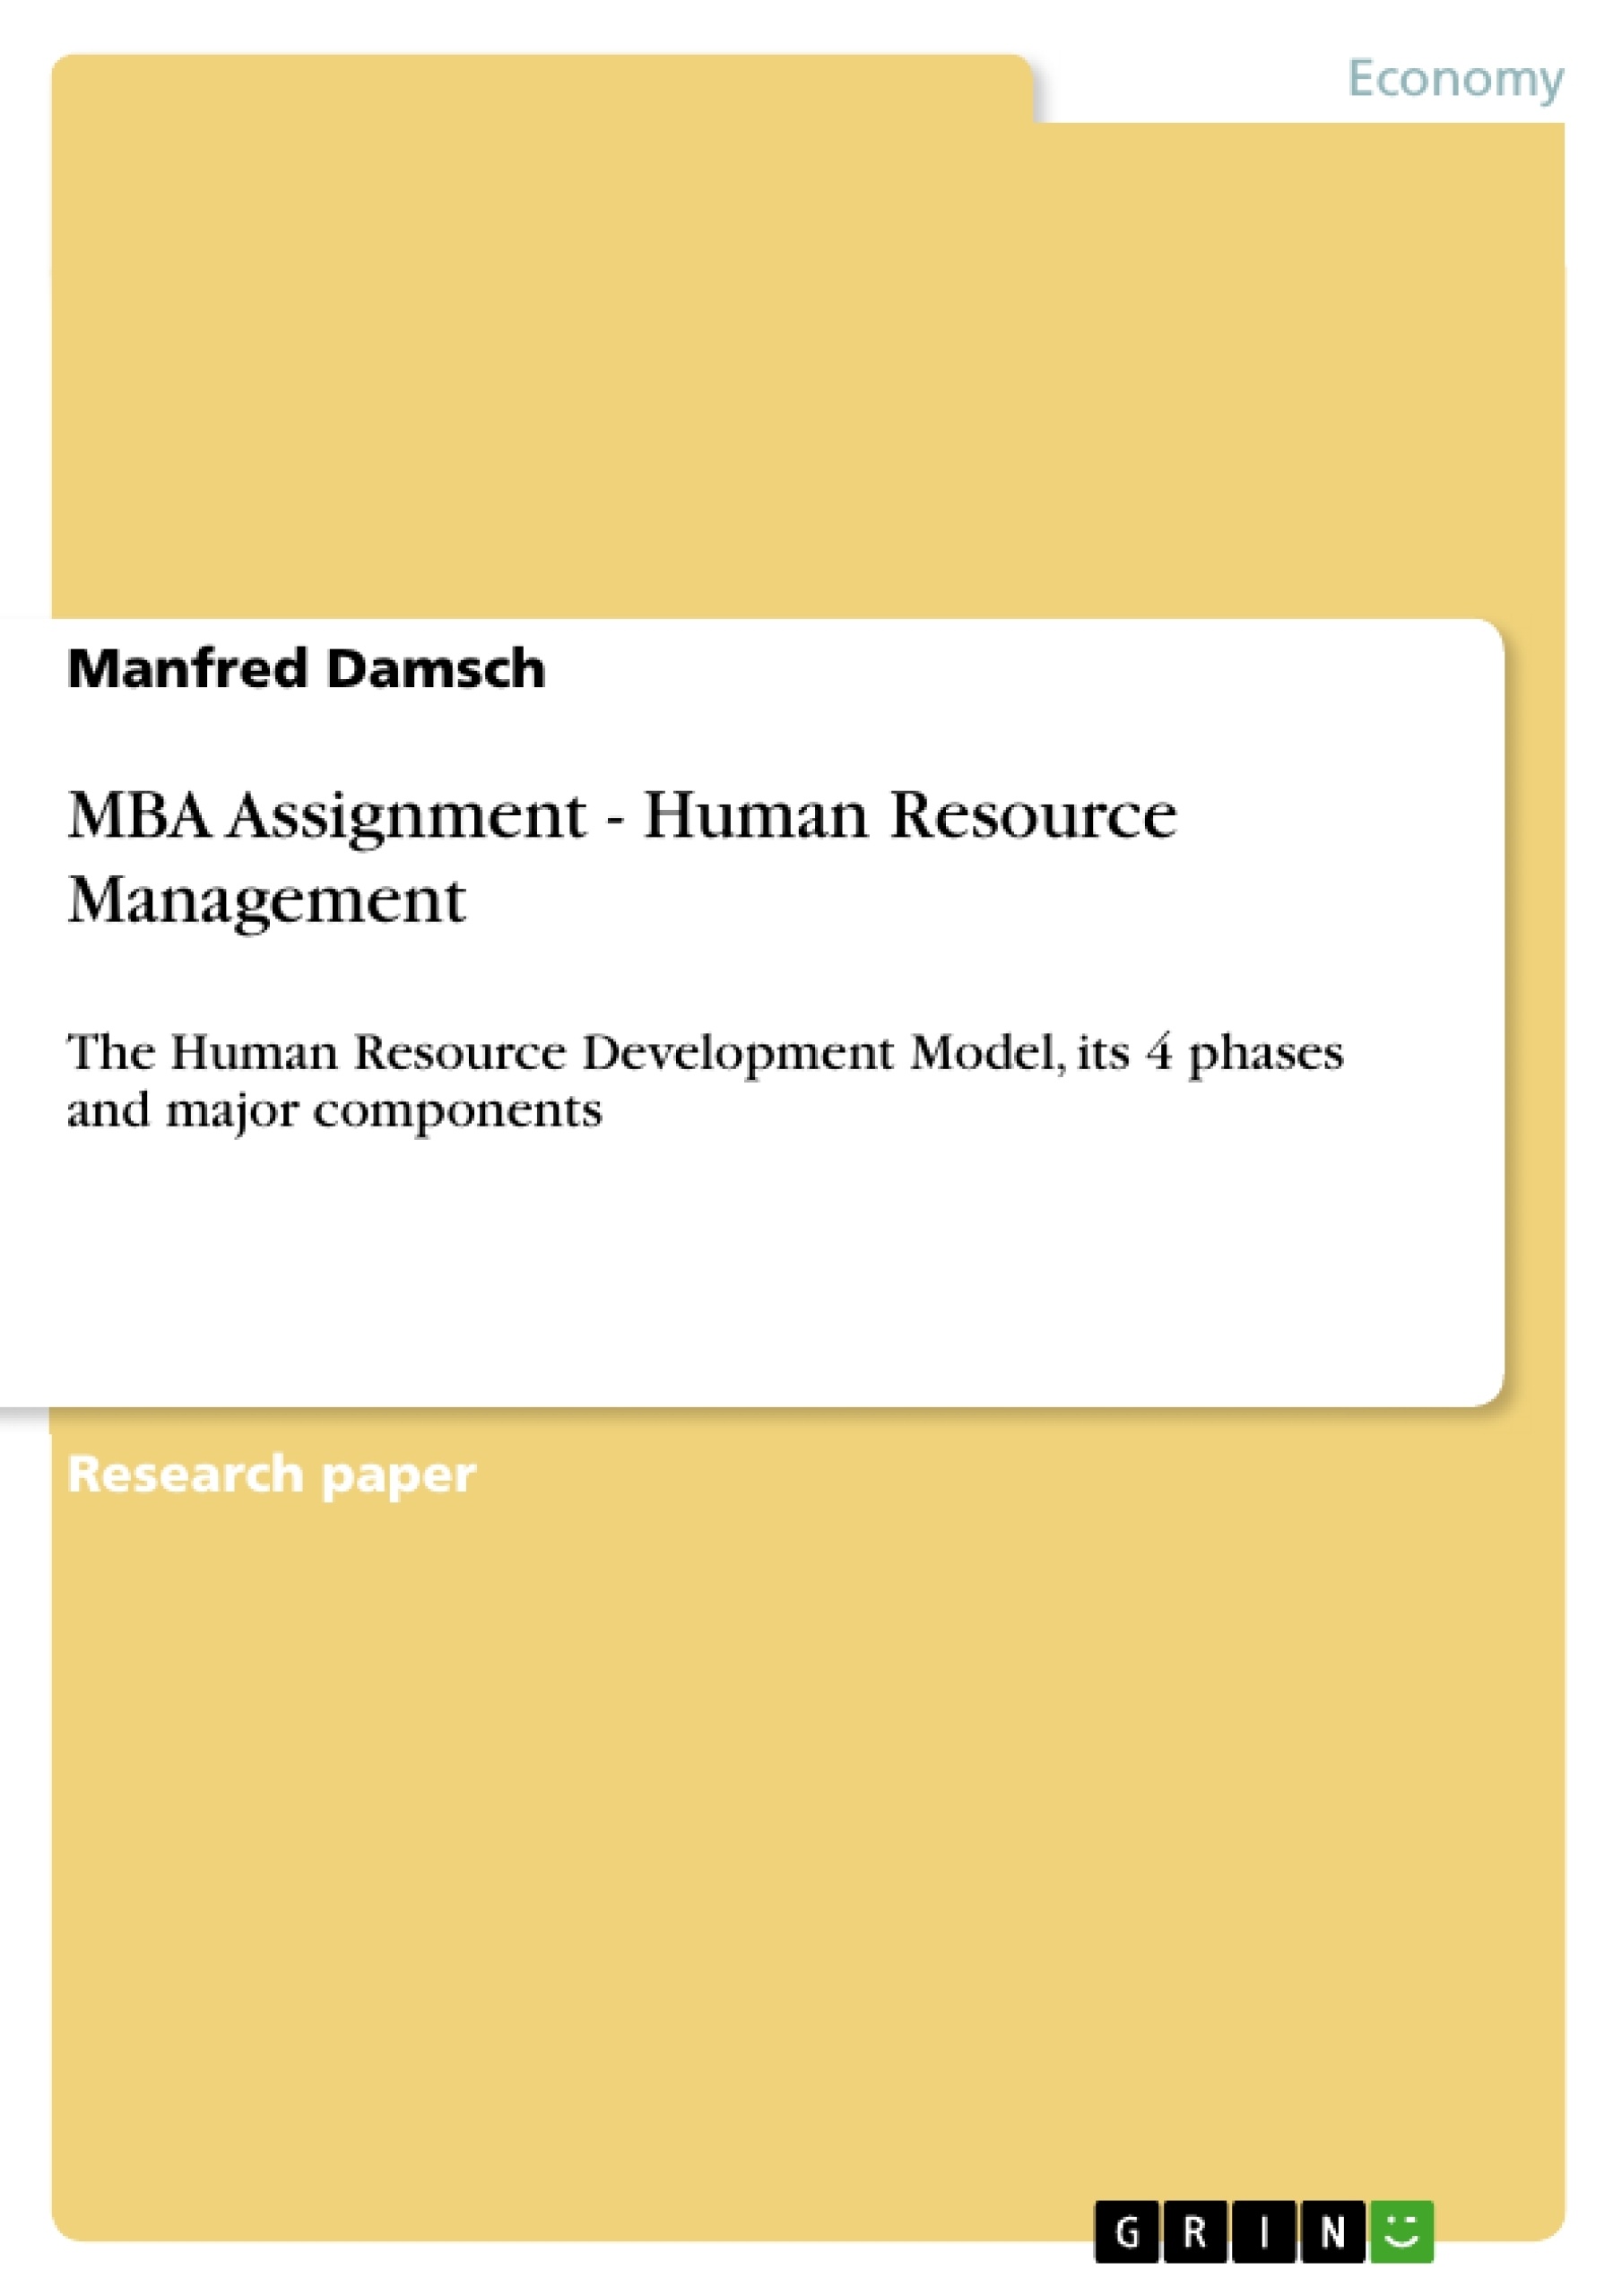 research paper on asset management